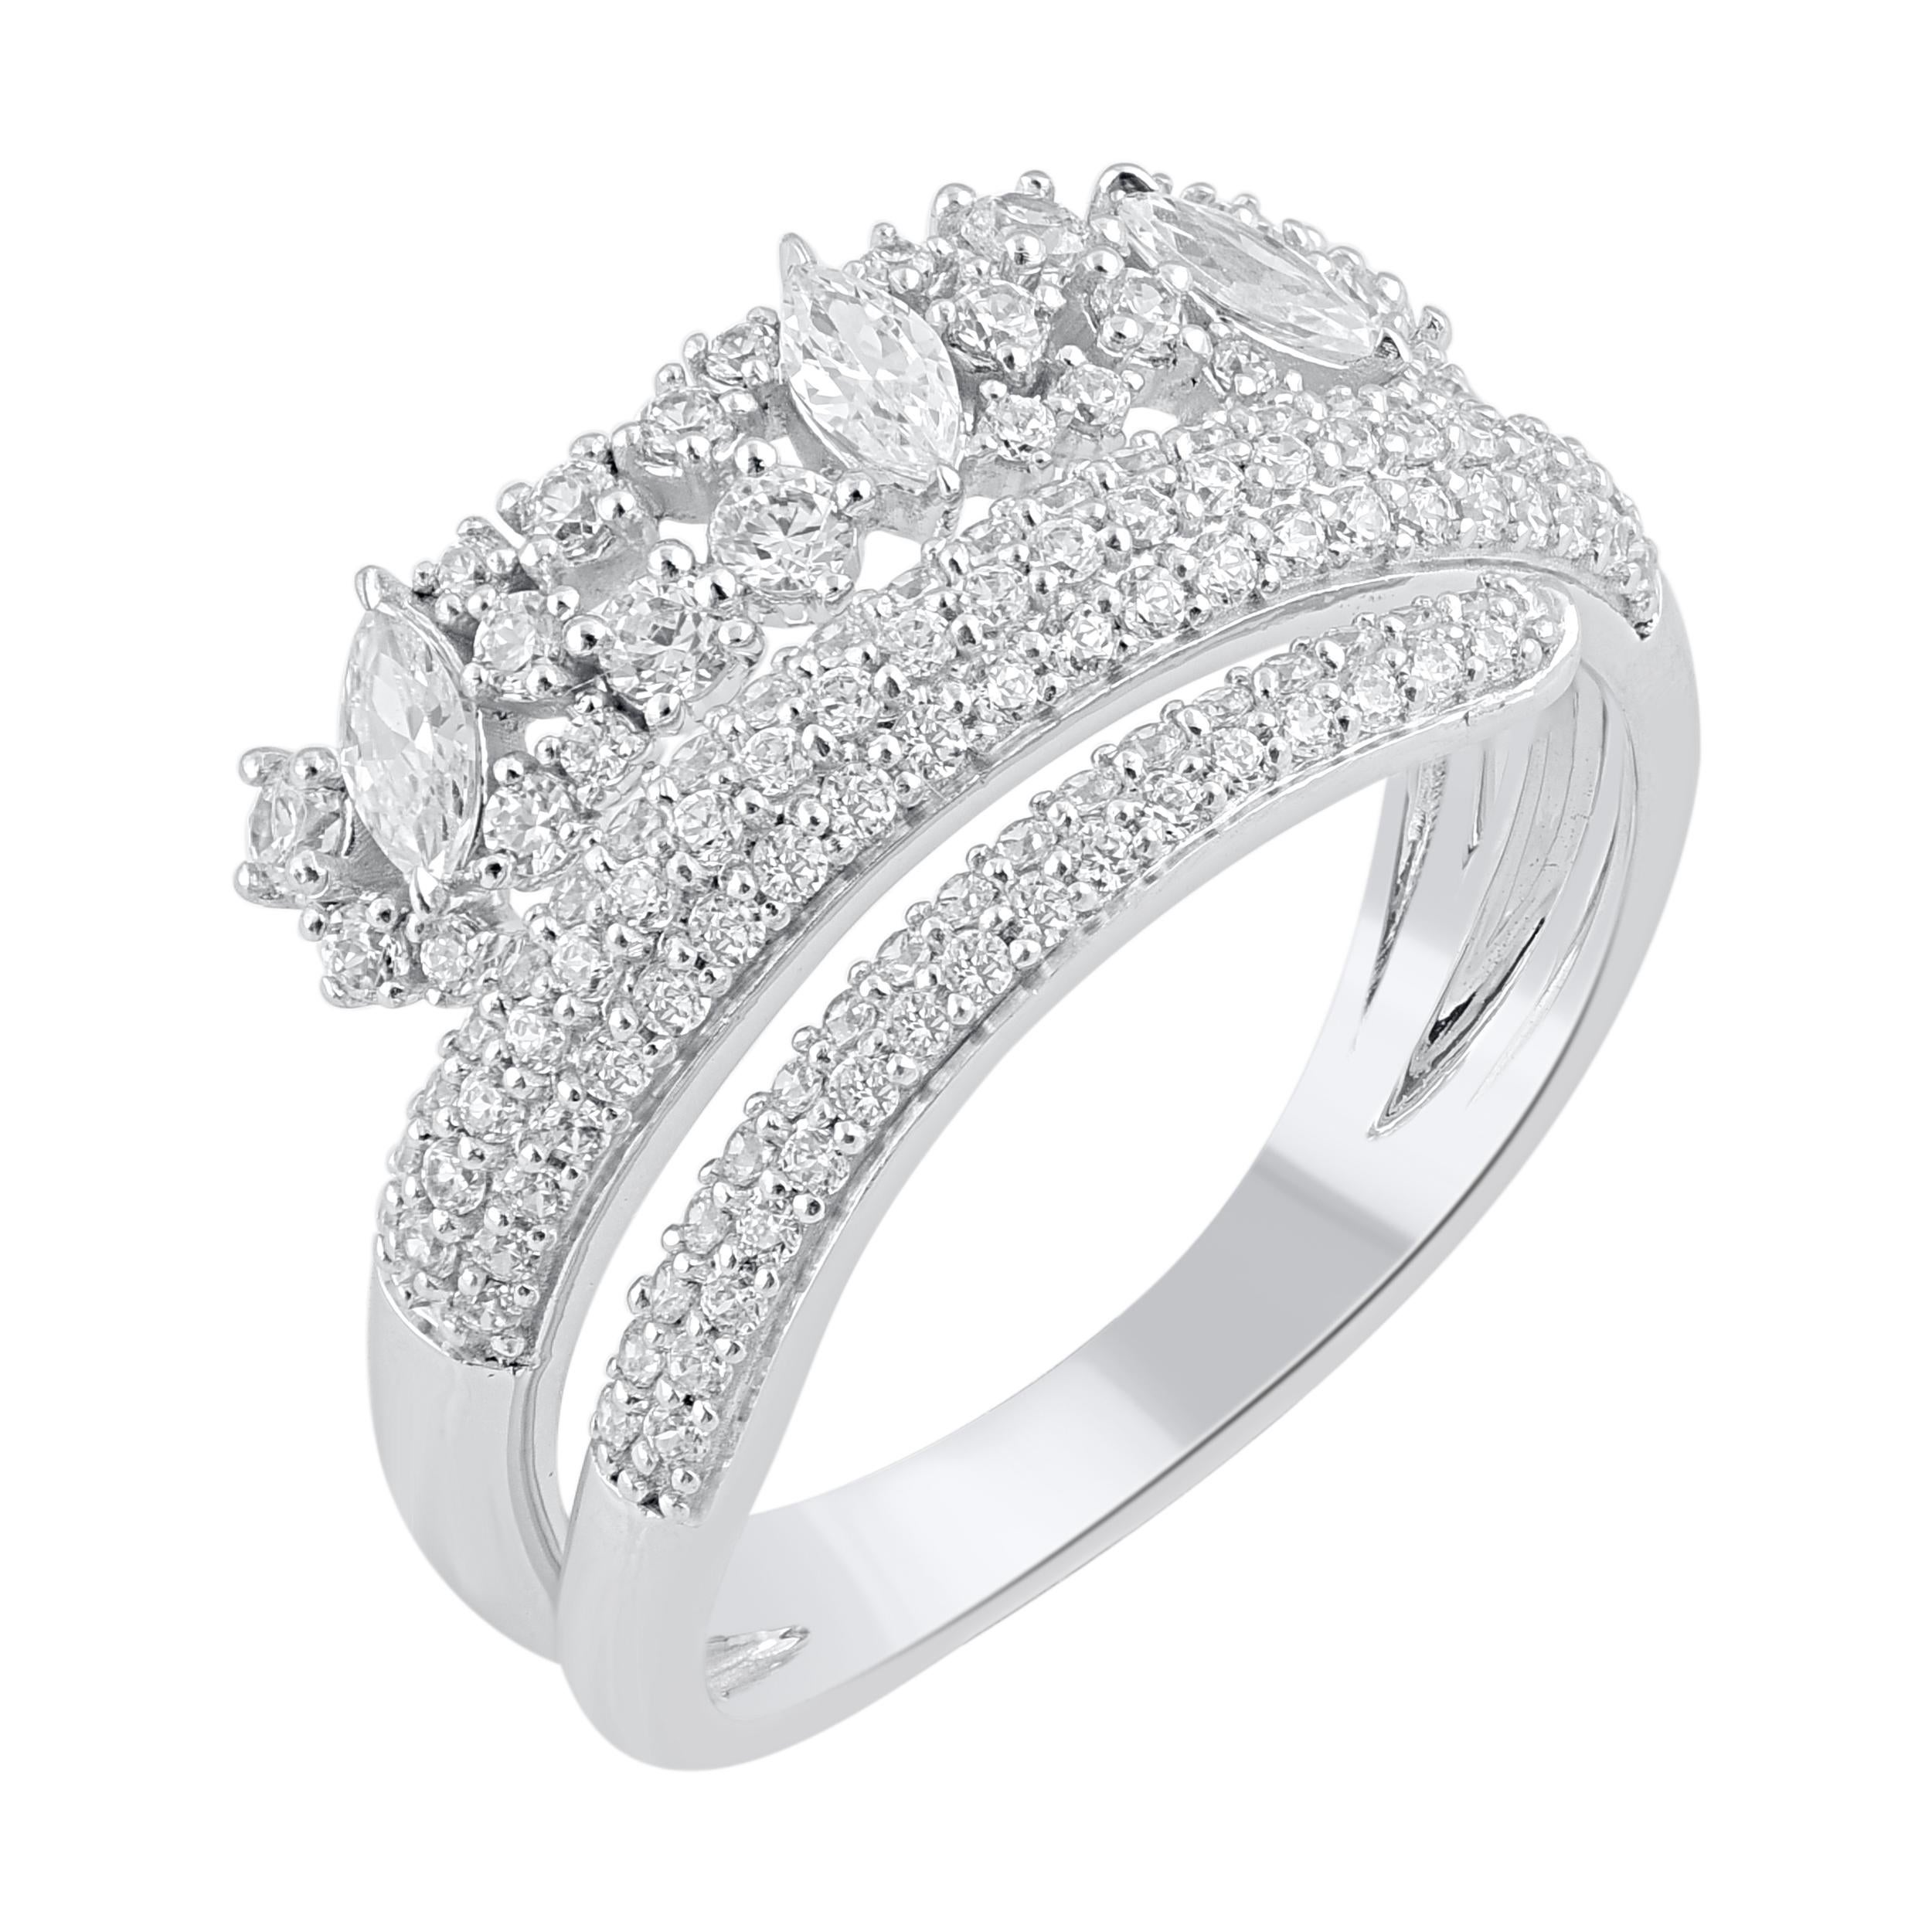 A meaningful symbol of your never ending commitment. The beautiful ring is crafted from 18-karat white gold and features 126 single cut, brilliant cut & marquise diamond set in prong, pave & marquise claw. The white diamonds are graded as H-I color